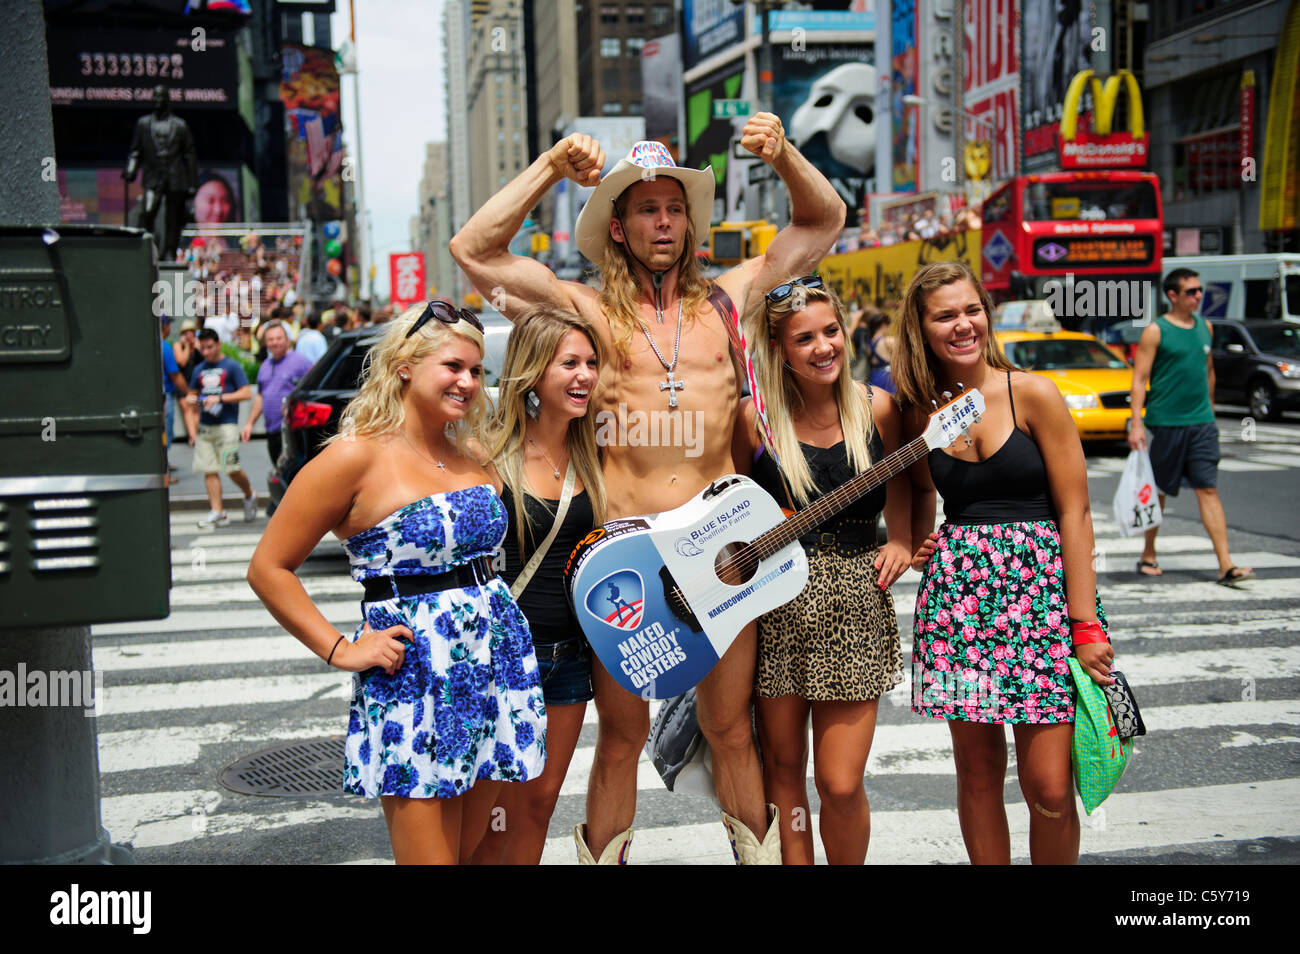 Naked girls in manhattan Naked Cowboy Entertainer With Tourists In Times Square New York City Manhattan United States Stock Photo Alamy